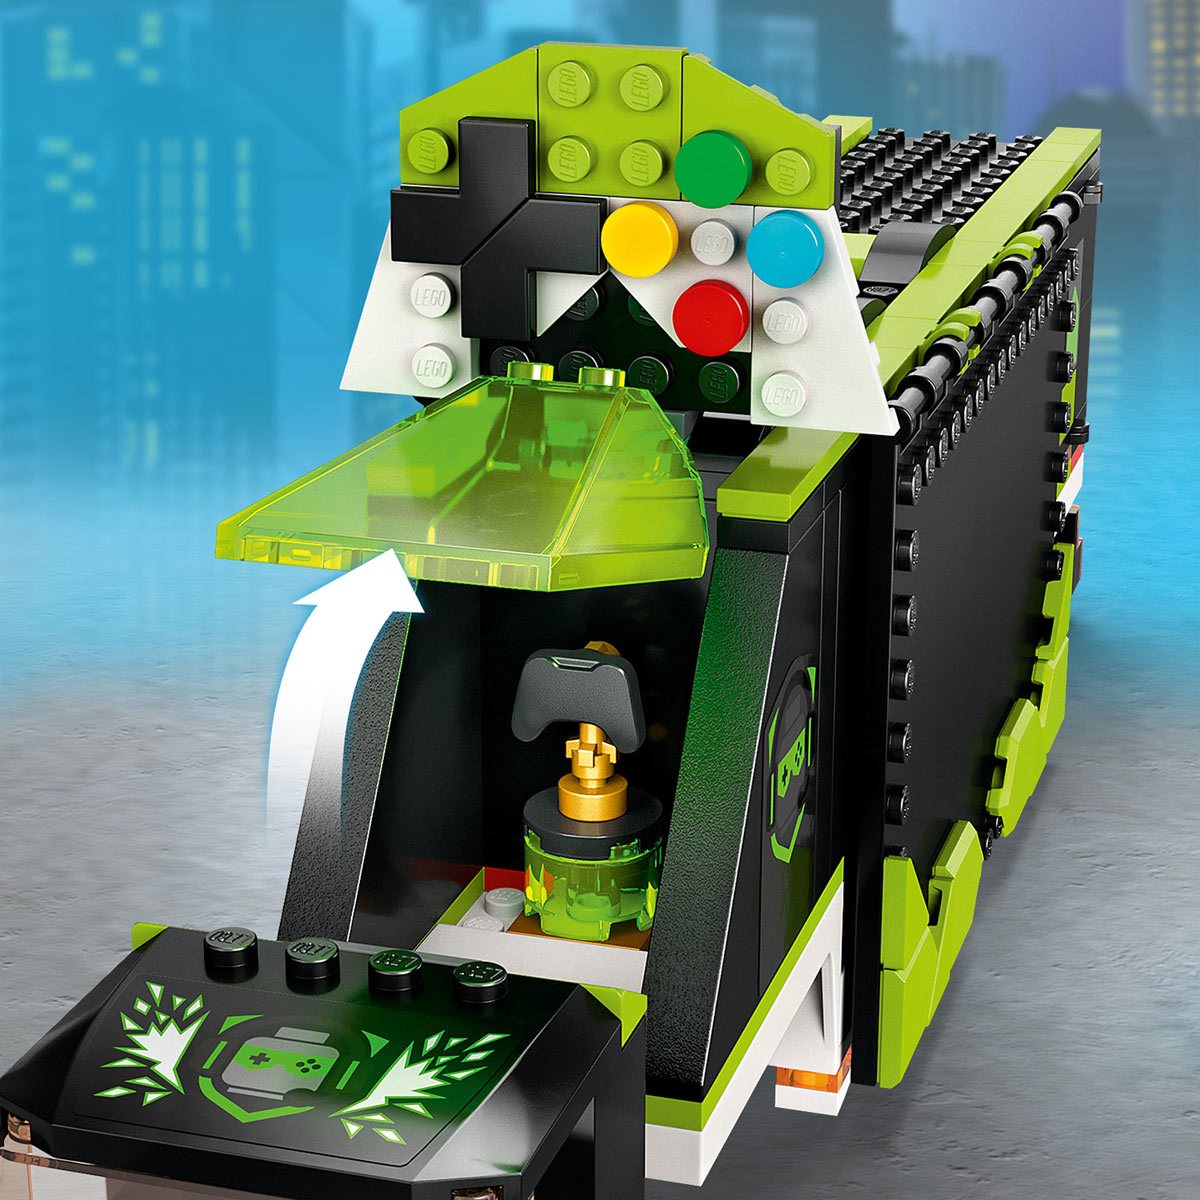 LEGO 60388 Entertainment Tournament Earth City - Gaming Truck